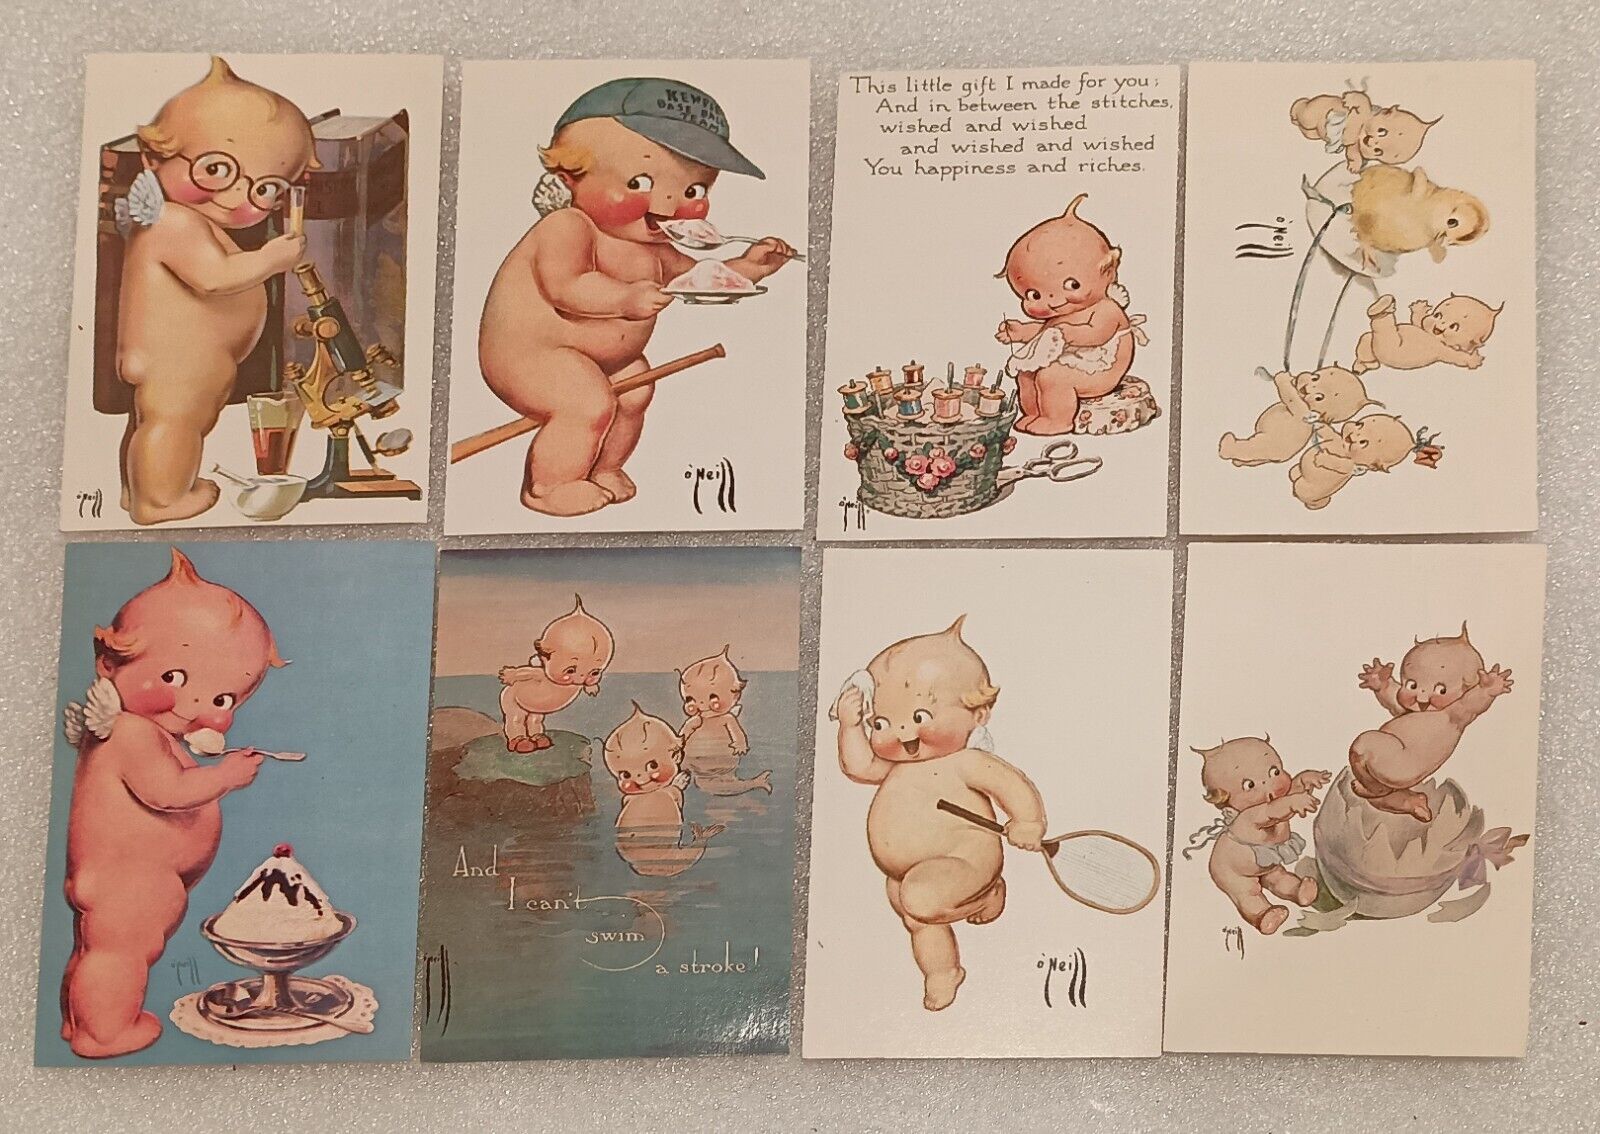 Lot of 8 - vintage Kewpie Doll Postcards by Rose O'Neill